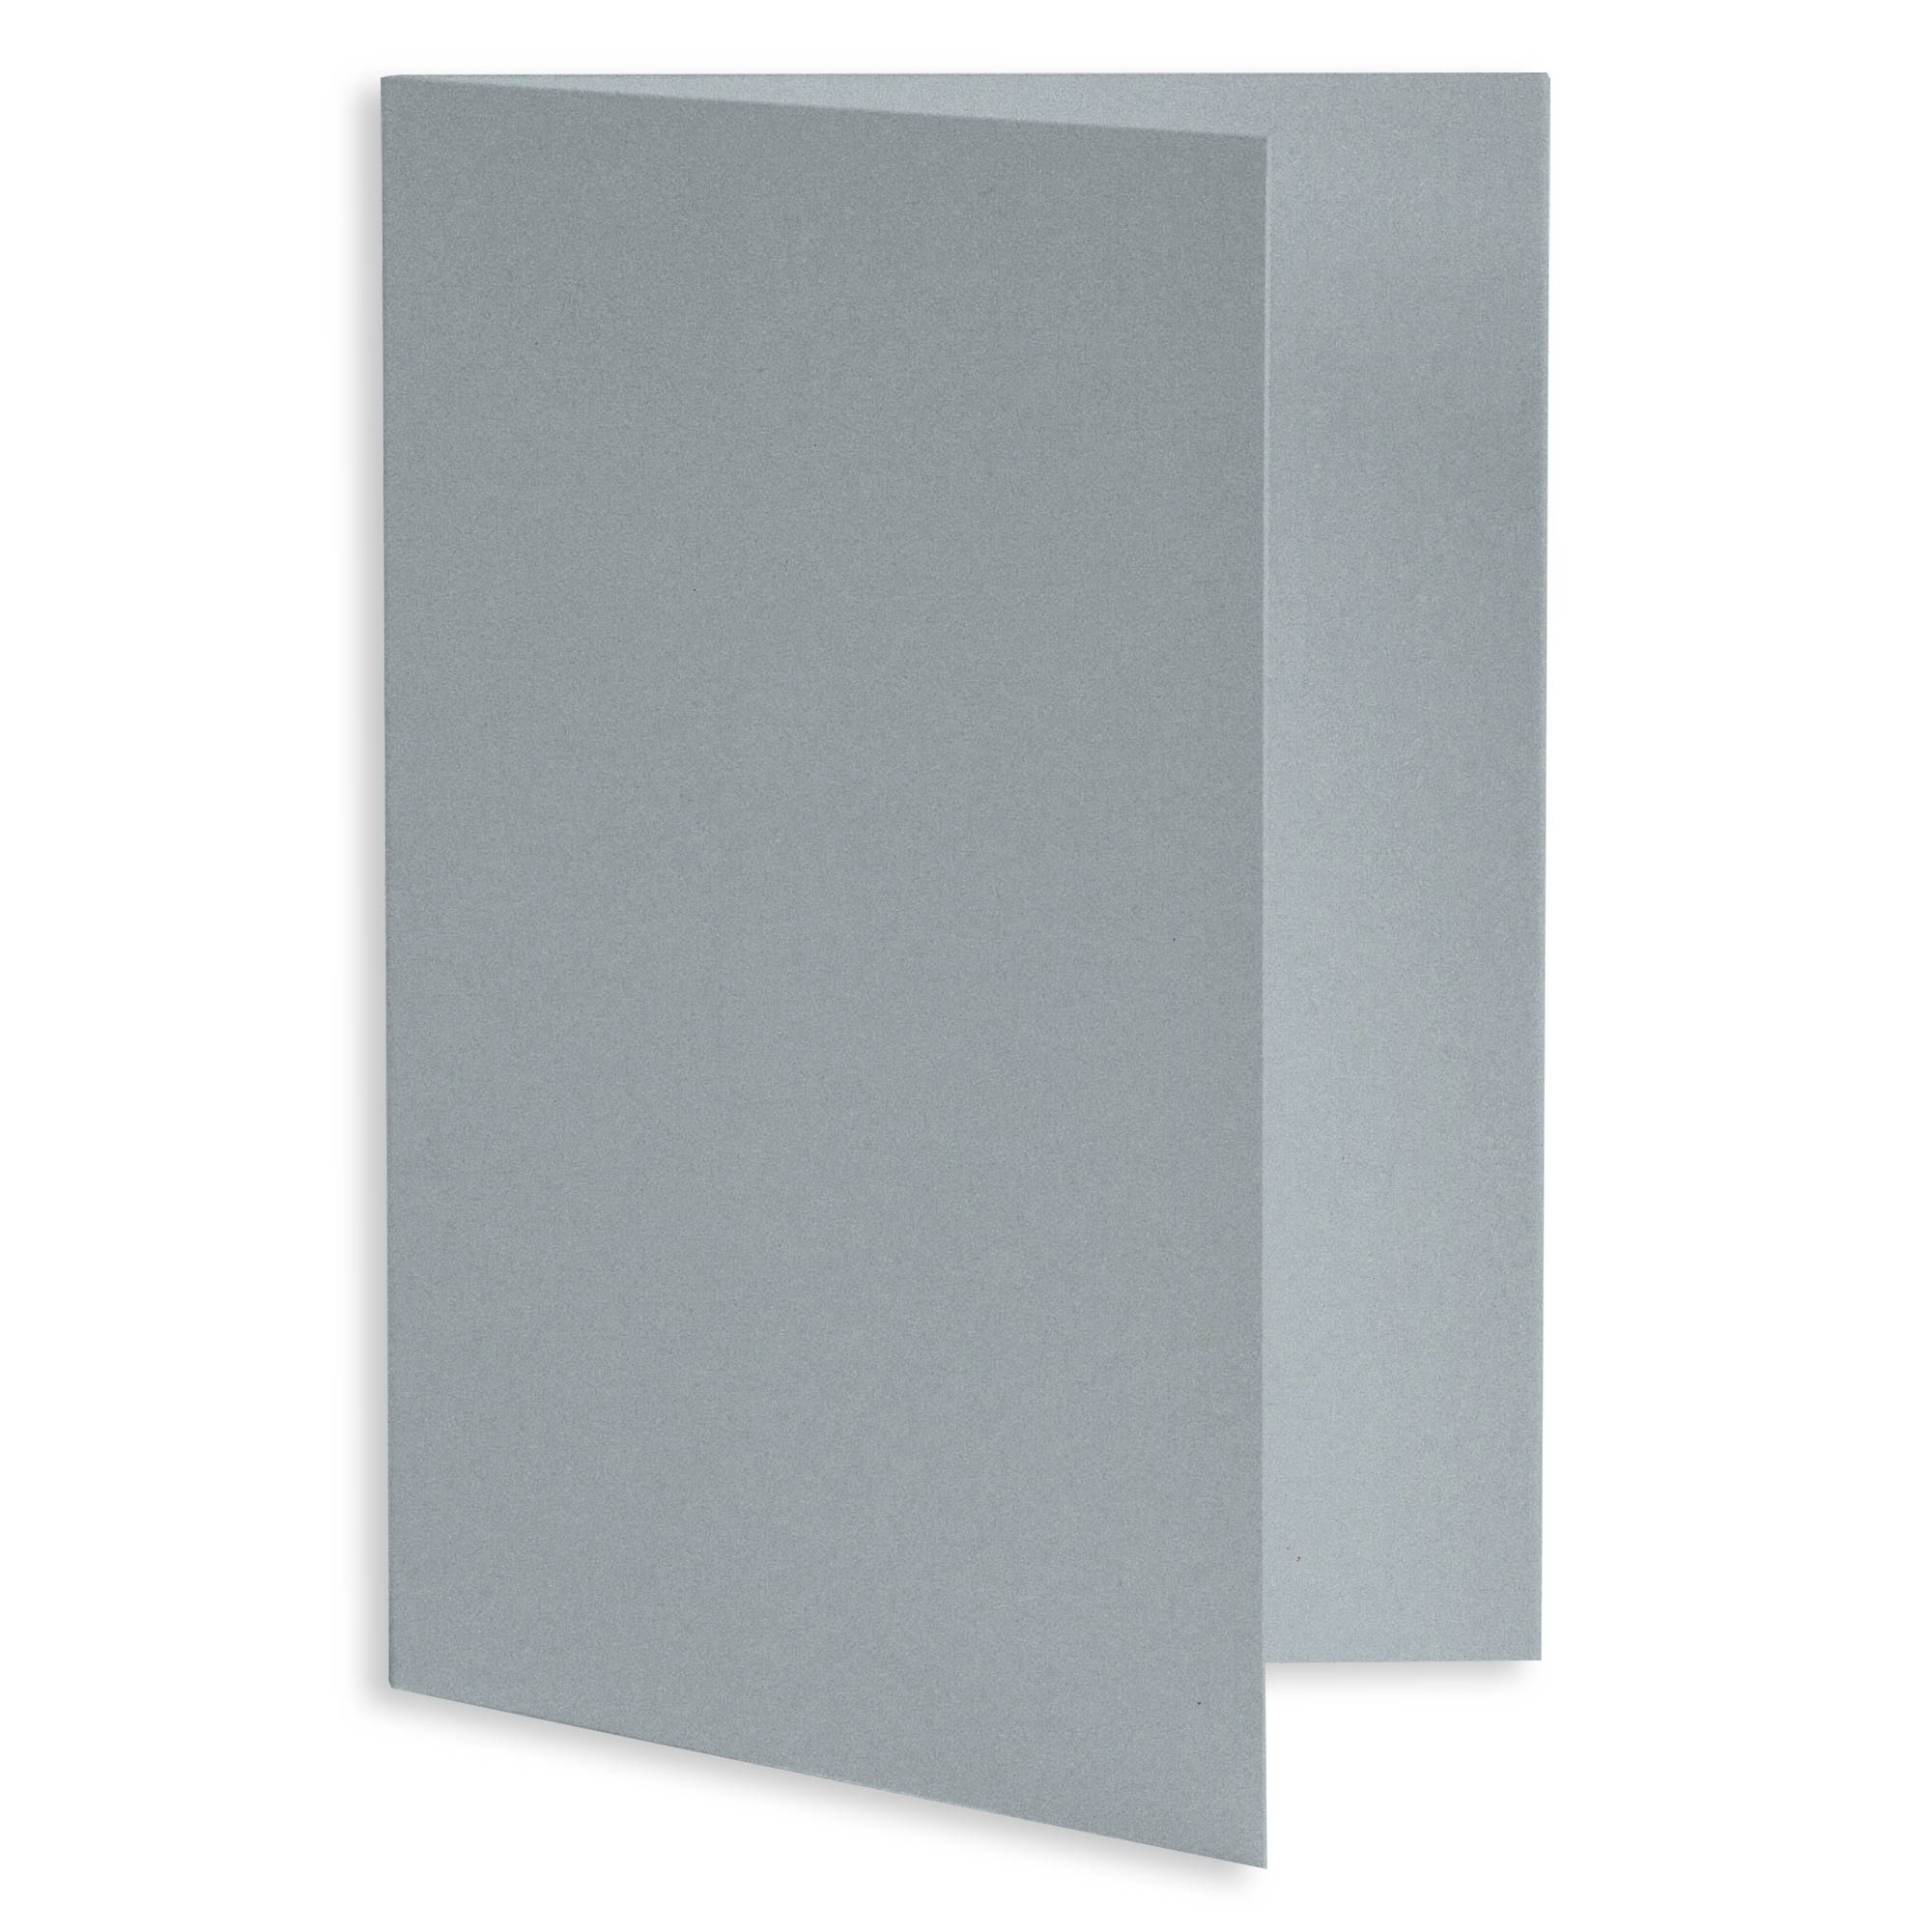 Weathered Grey Folded Card - A6 Environment Smooth 4 1/2 x 6 1/4 80C